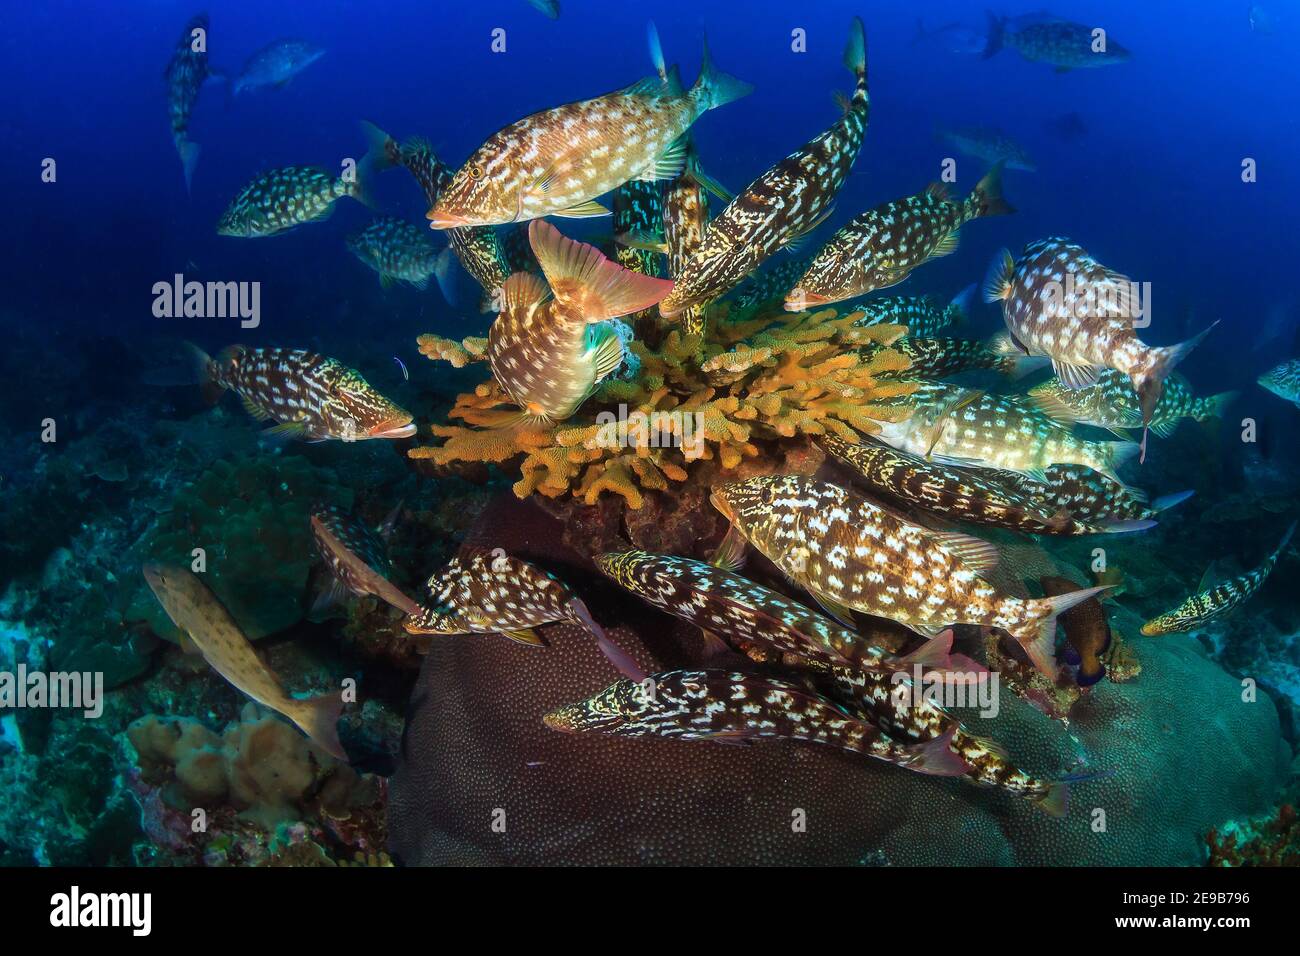 A school of long-nose Emperor fish in hunting textures swarm on a hard coral on a tropical reef. Stock Photo